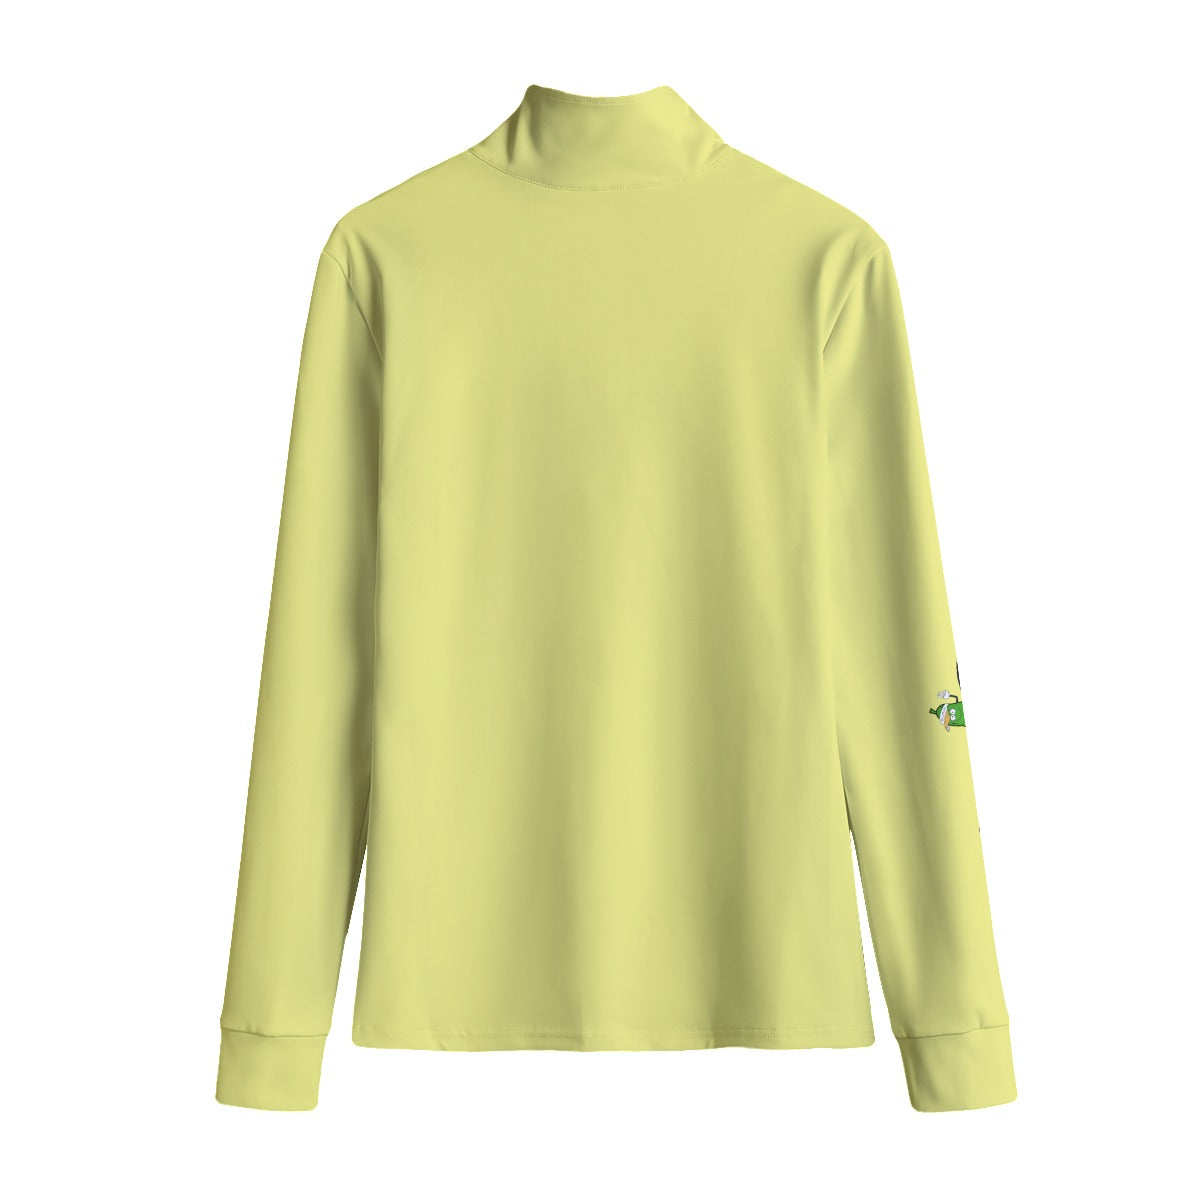 DZY P Classic - Daffodil Yellow - Women's Quarter Zip Long Sleeve Casual Pullover by Dizzy Pickle